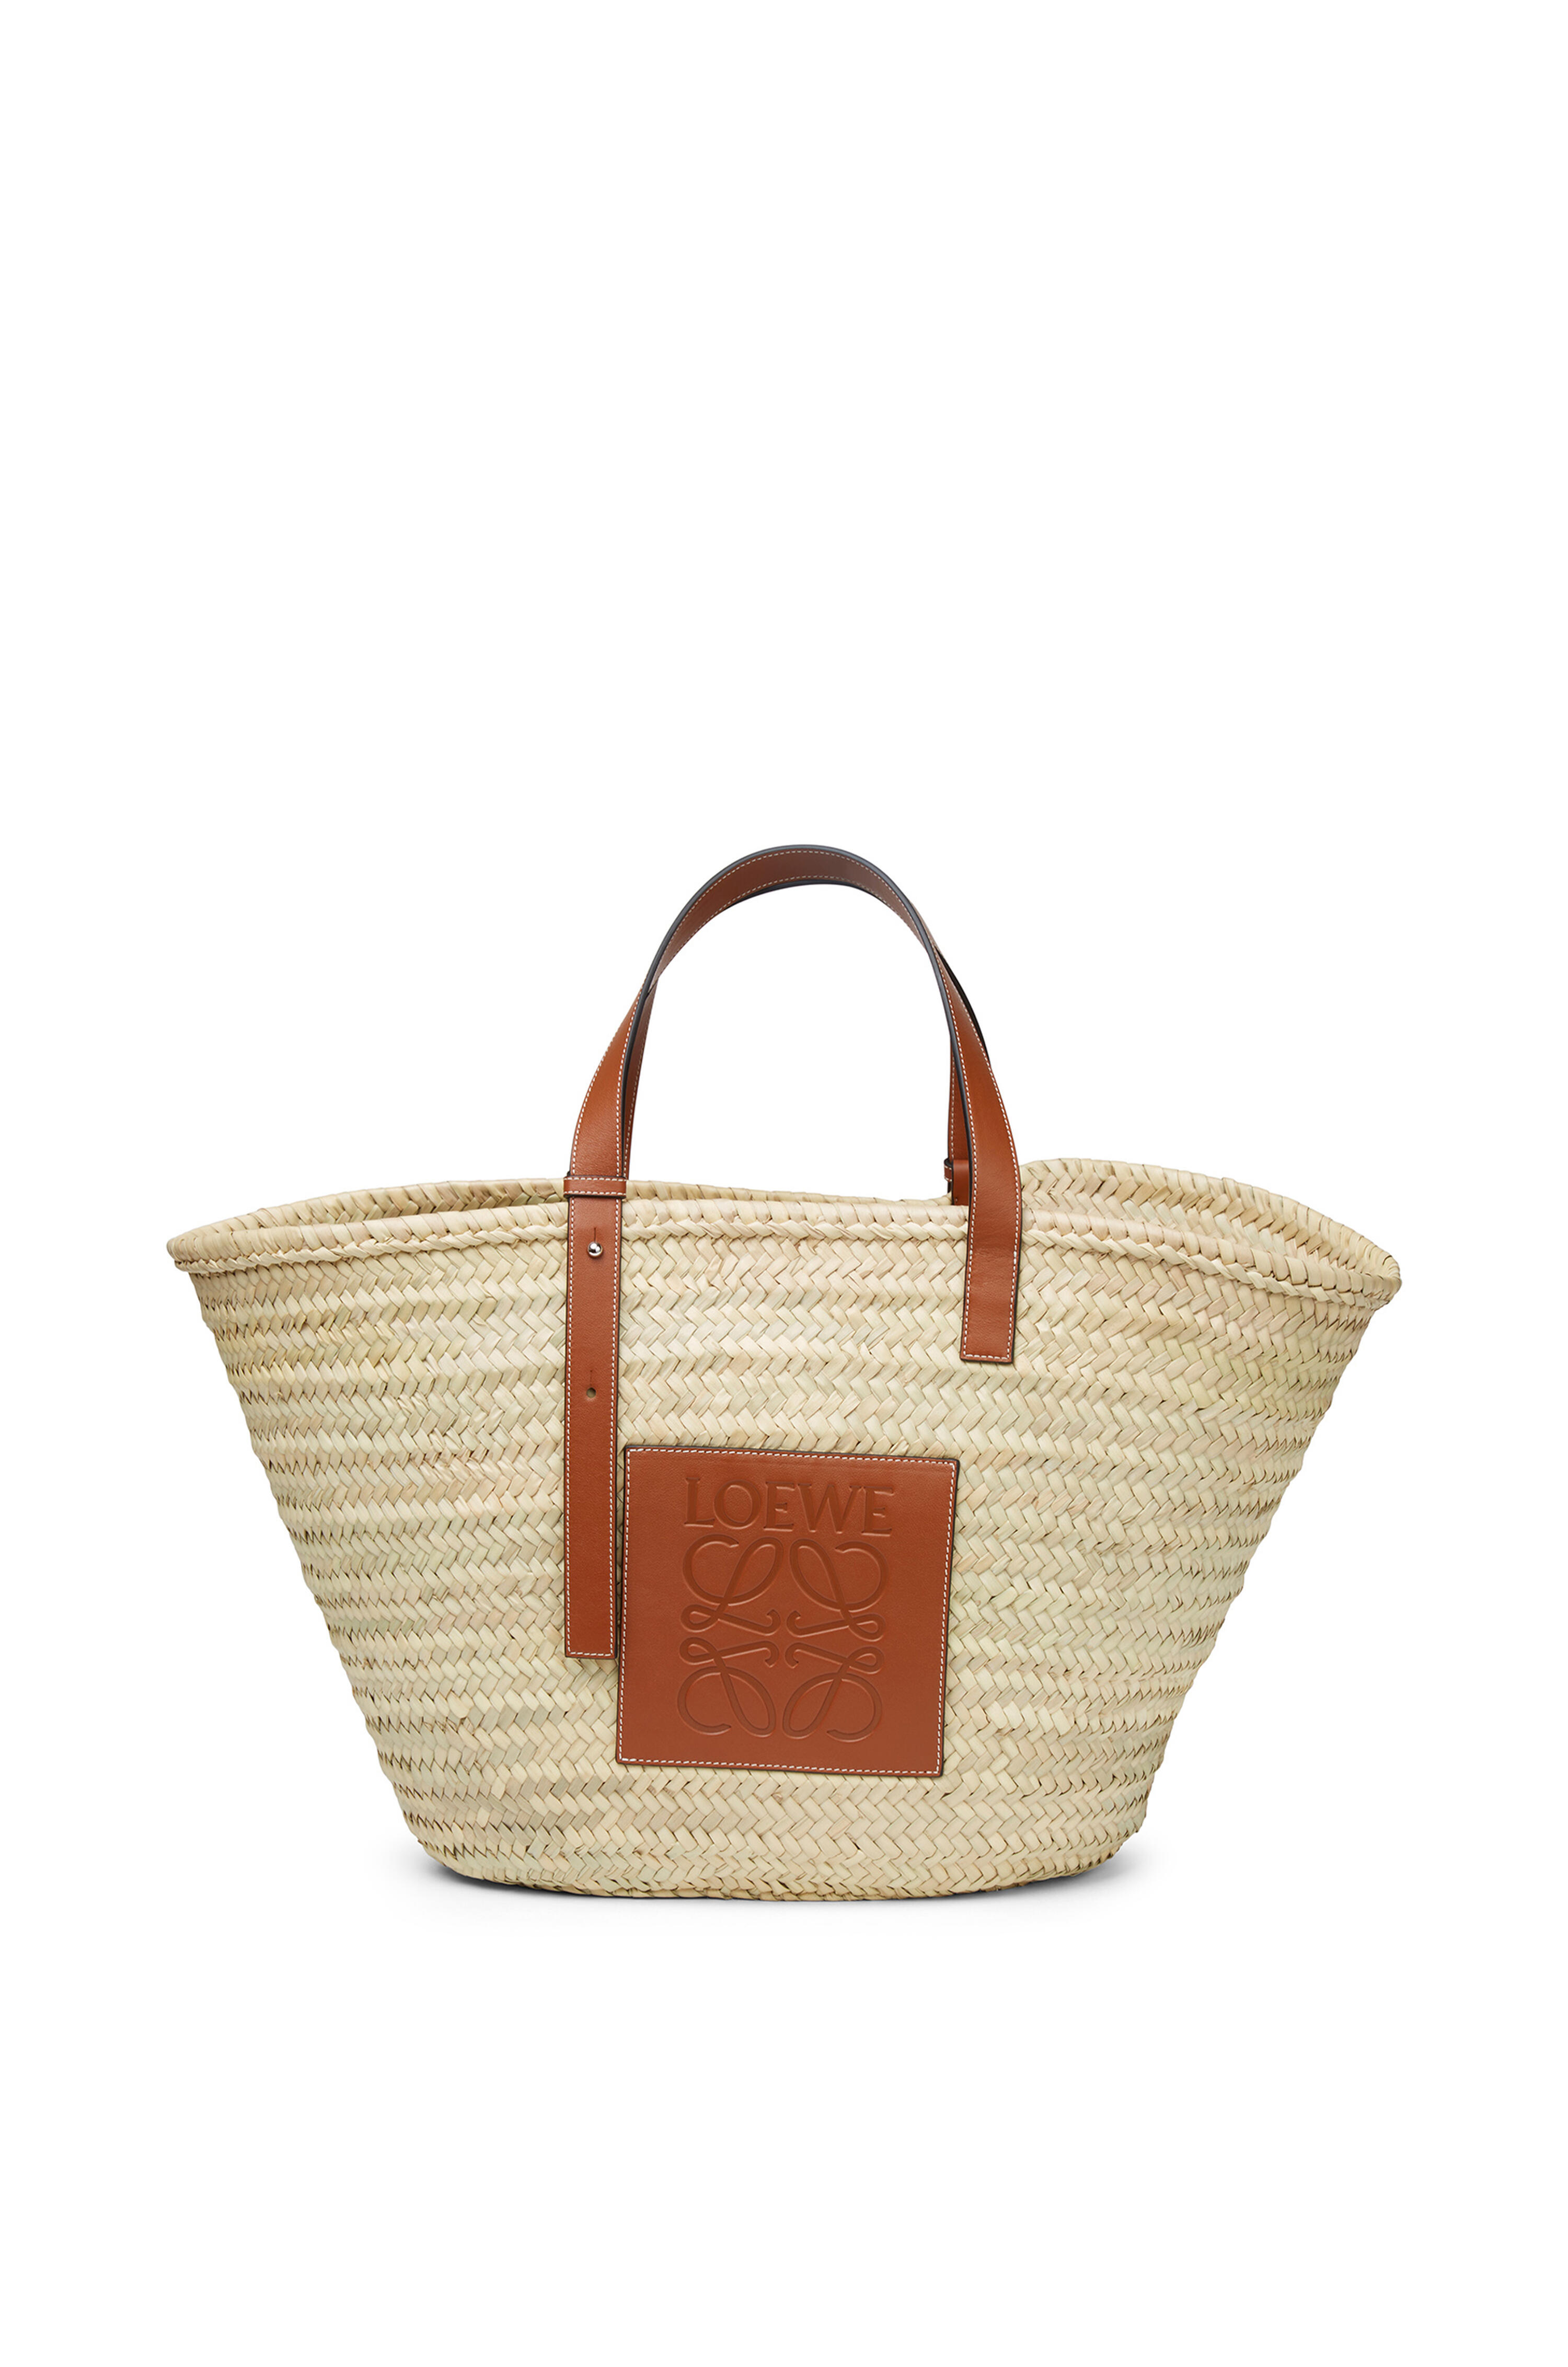 Small Leather Trimmed Basket Tote in White  Loewe  Mytheresa